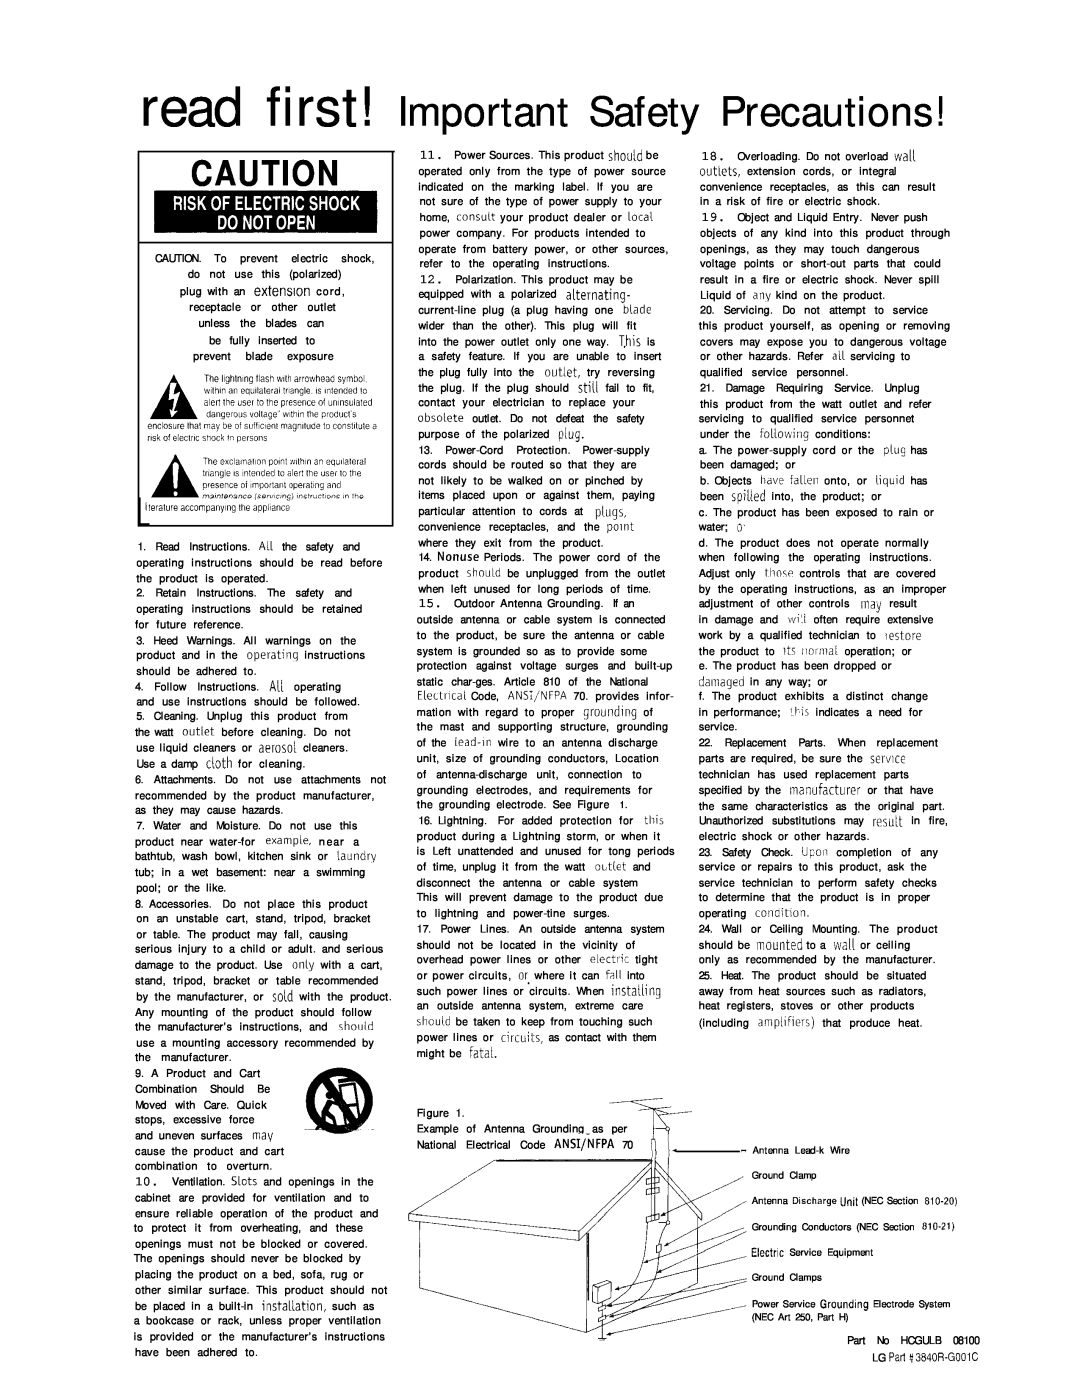 Harman-Kardon CDR 26 owner manual read first! Important Safety Precautions 